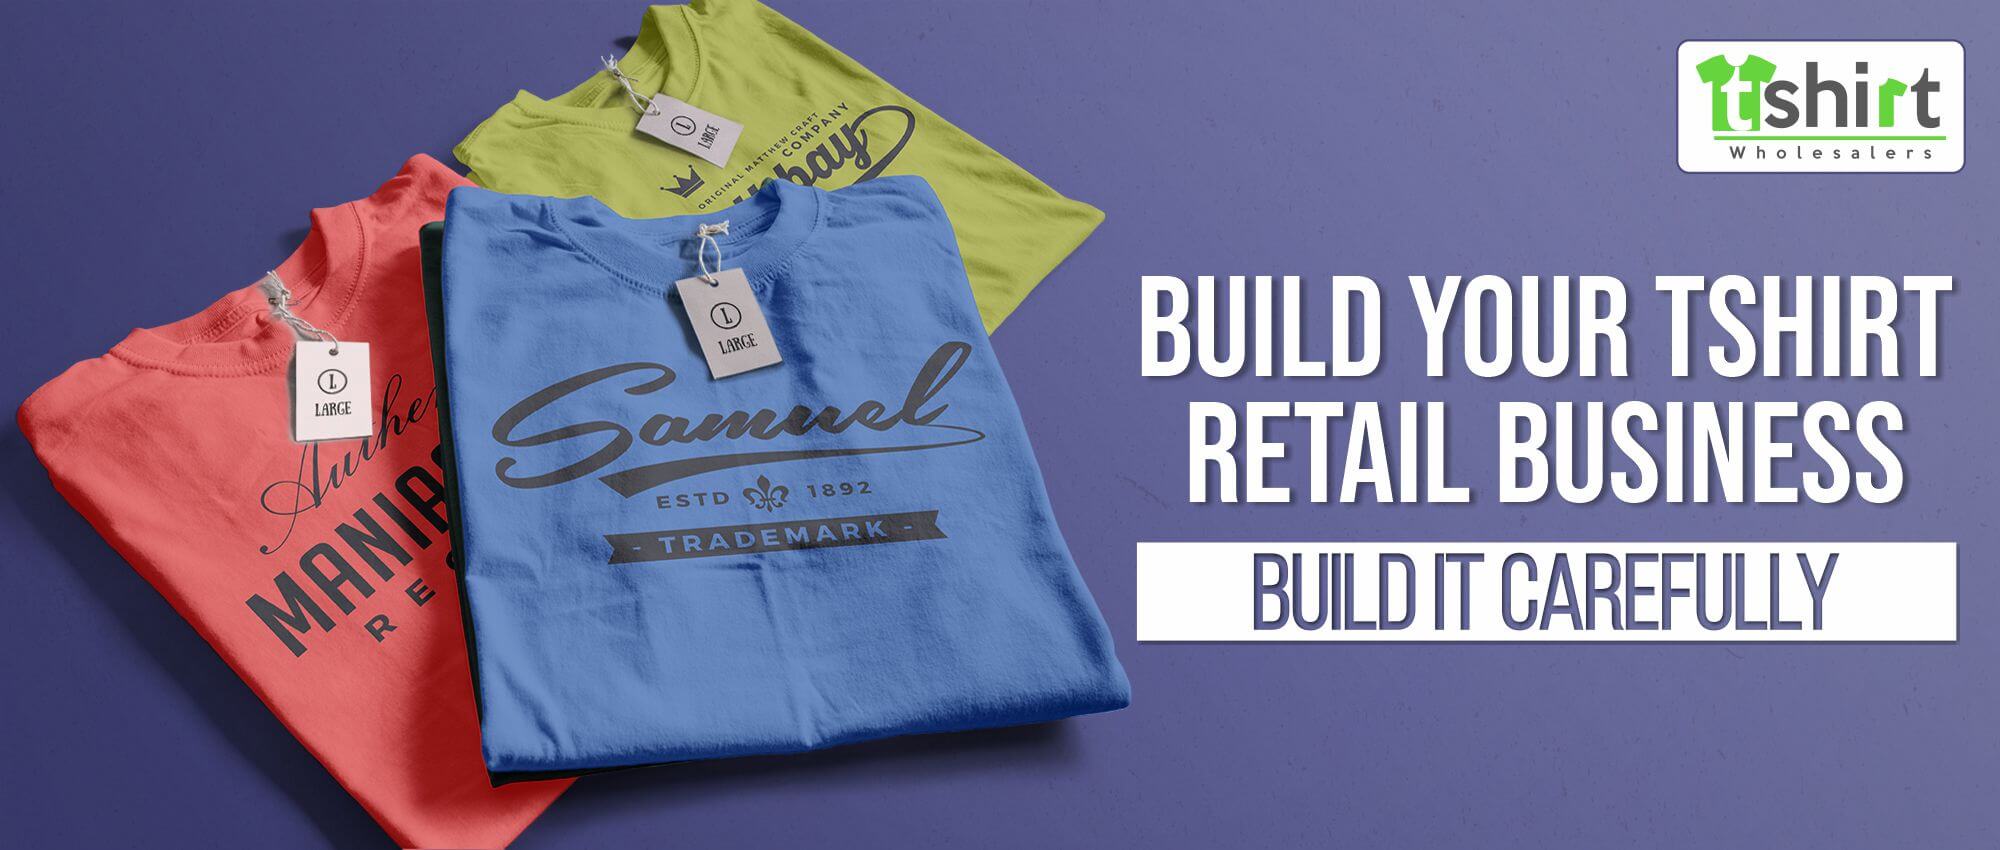 BUILD YOUR TSHIRT RETAIL BUSINESS. BUILD IT CAREFULLY